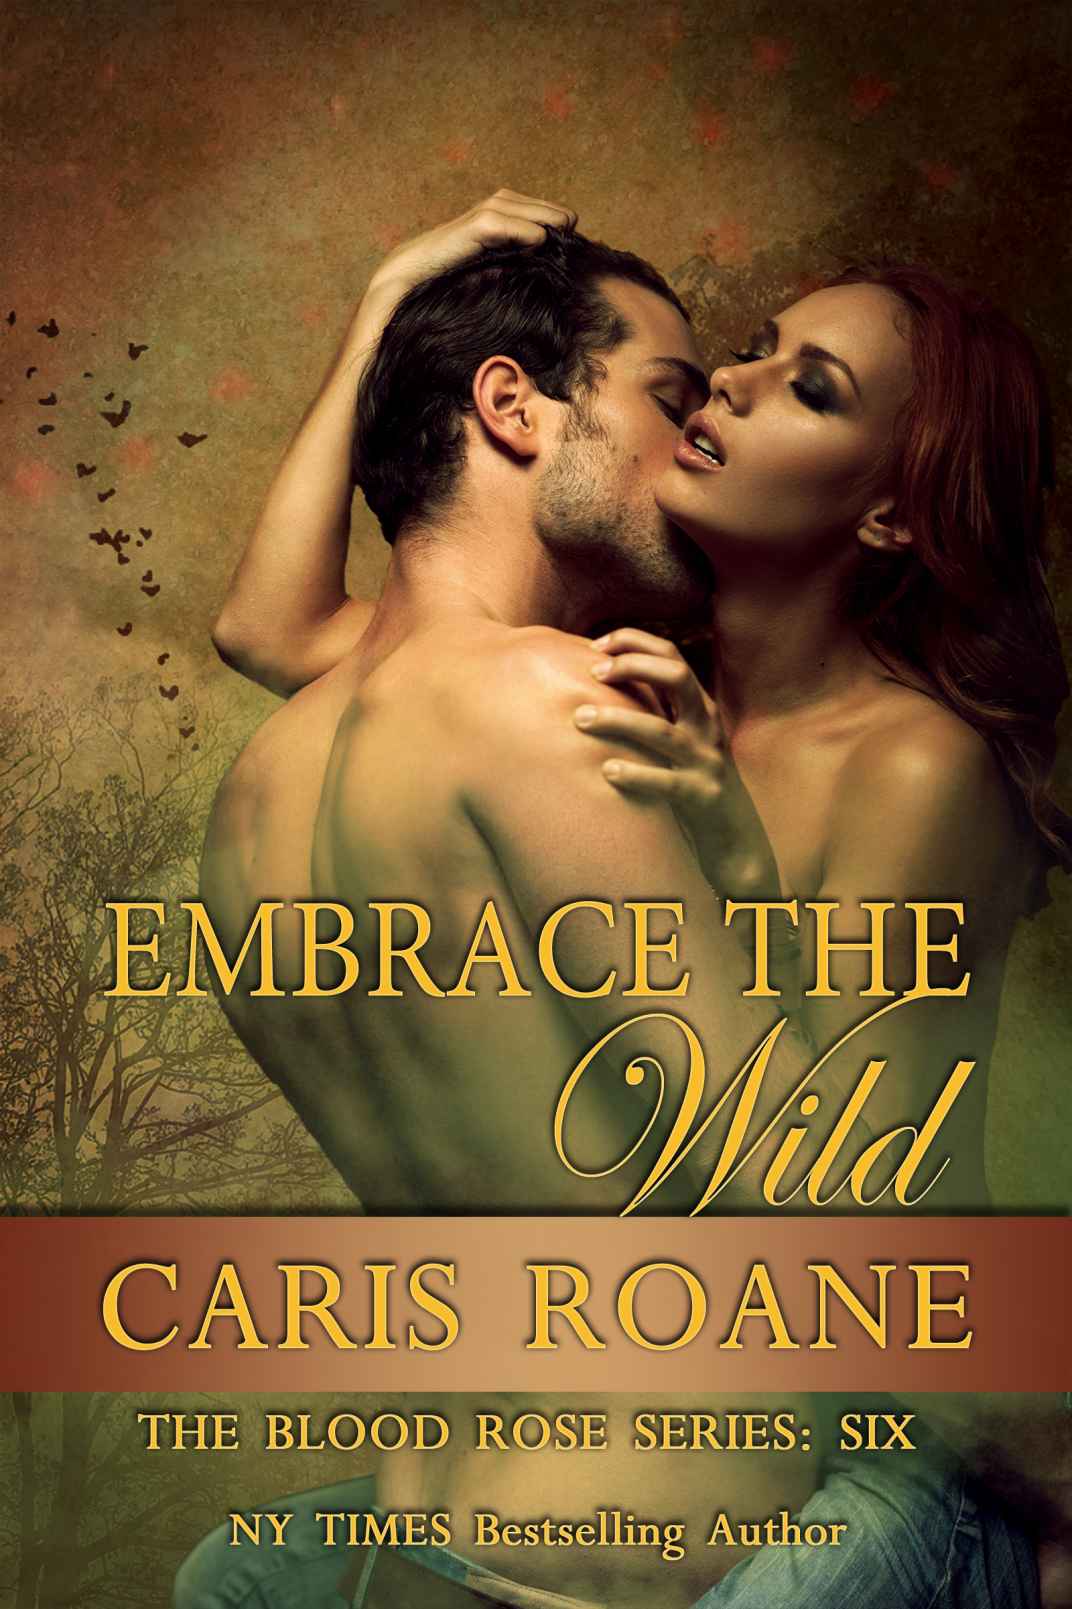 Embrace the Wild (The Blood Rose Series Book 6) by Caris Roane